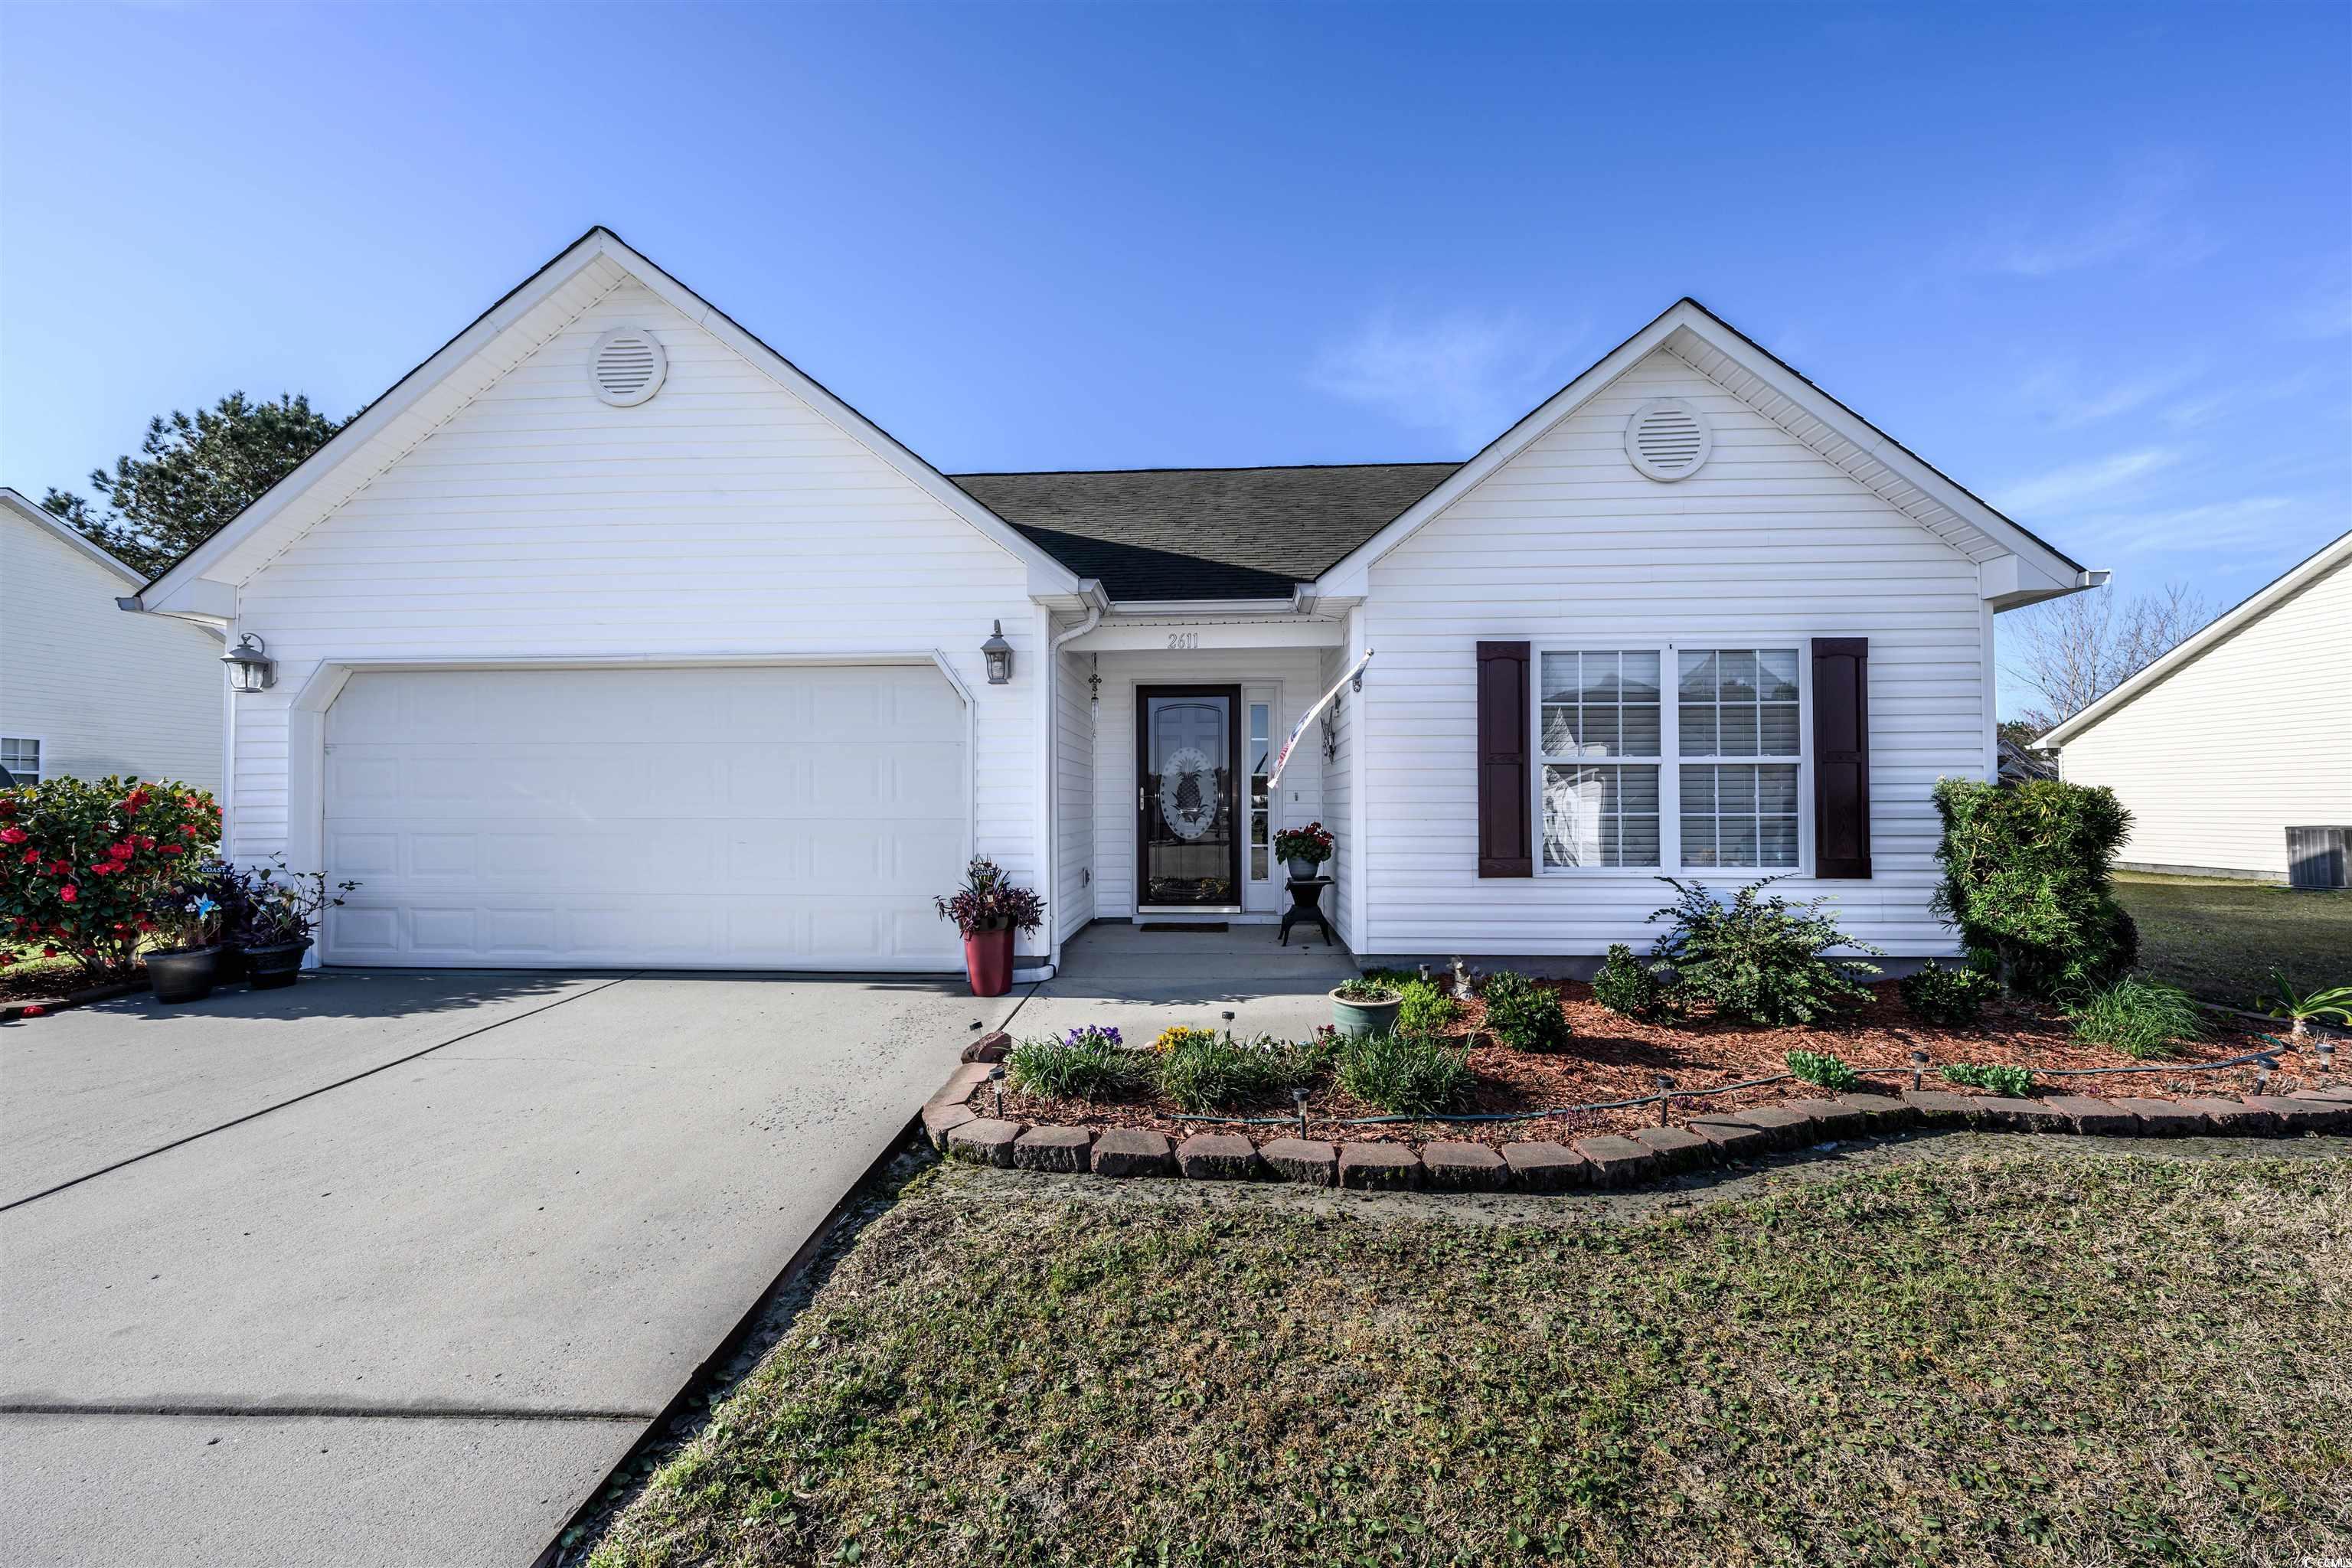 Photo one of 2611 Soapstone Ave. Little River SC 29566 | MLS 2404964